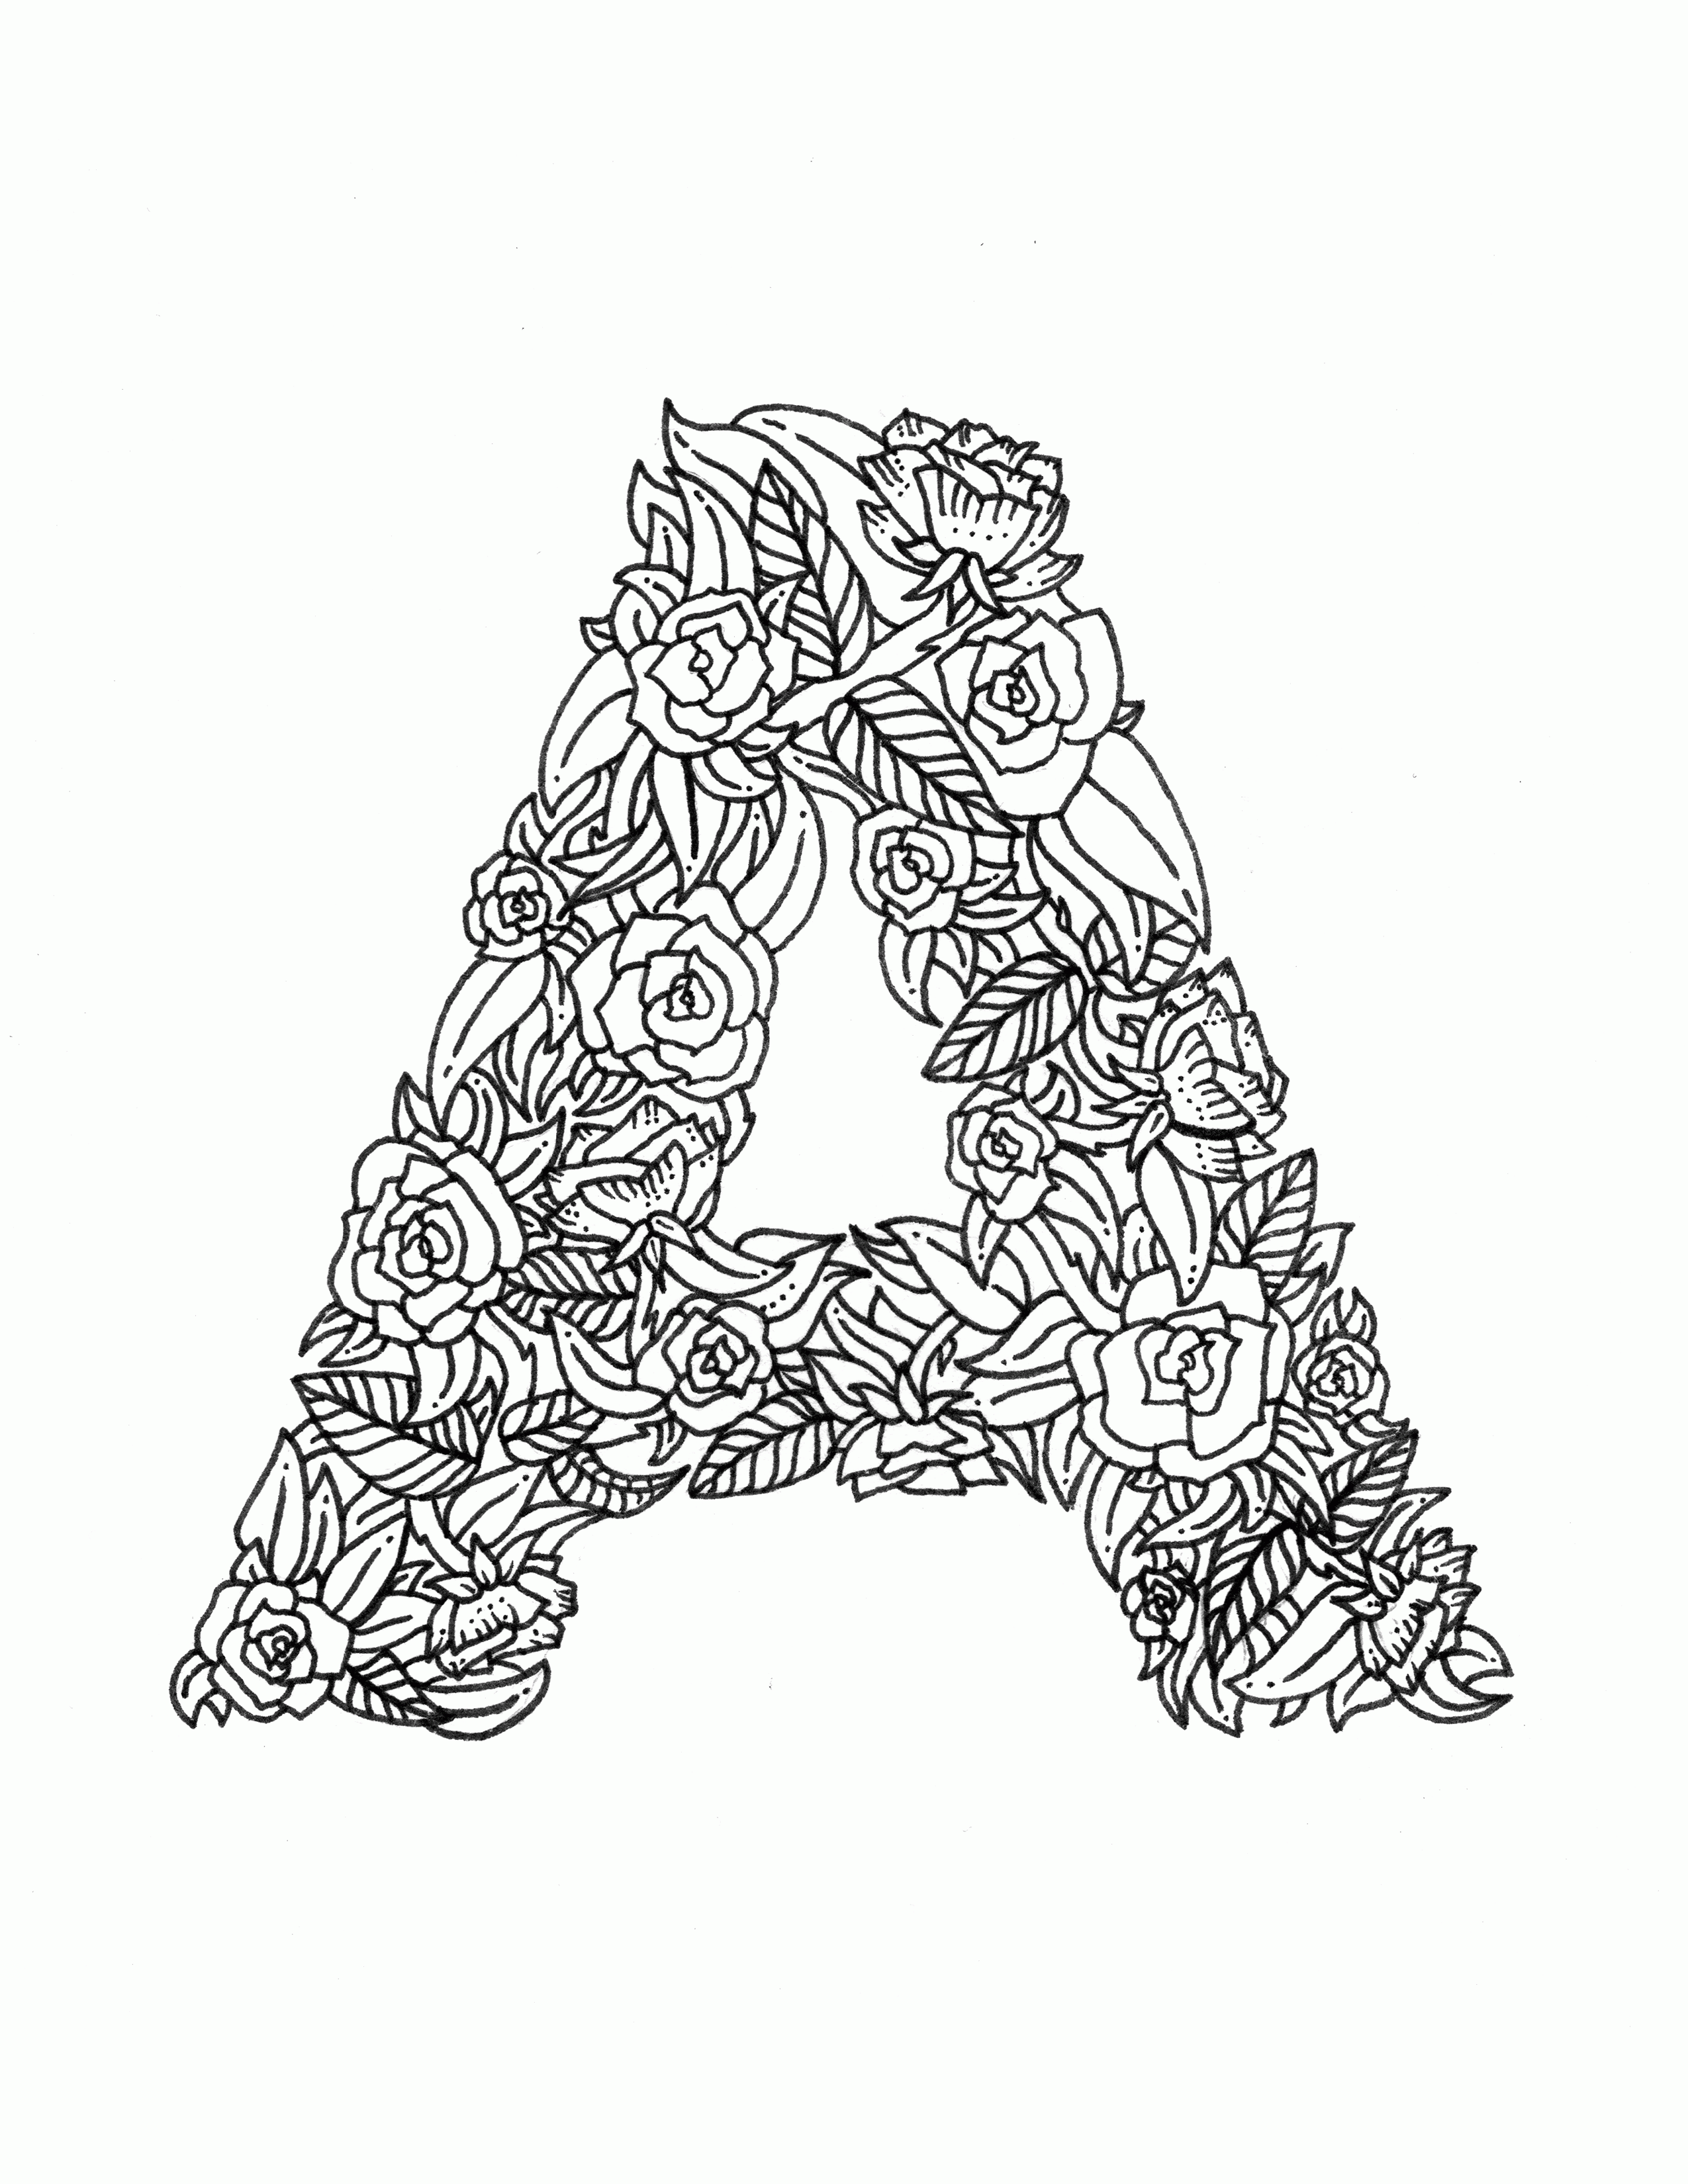 Coloring Letter Adults Alphabet Vector Book Illustration Preview Sketch Coloring Page